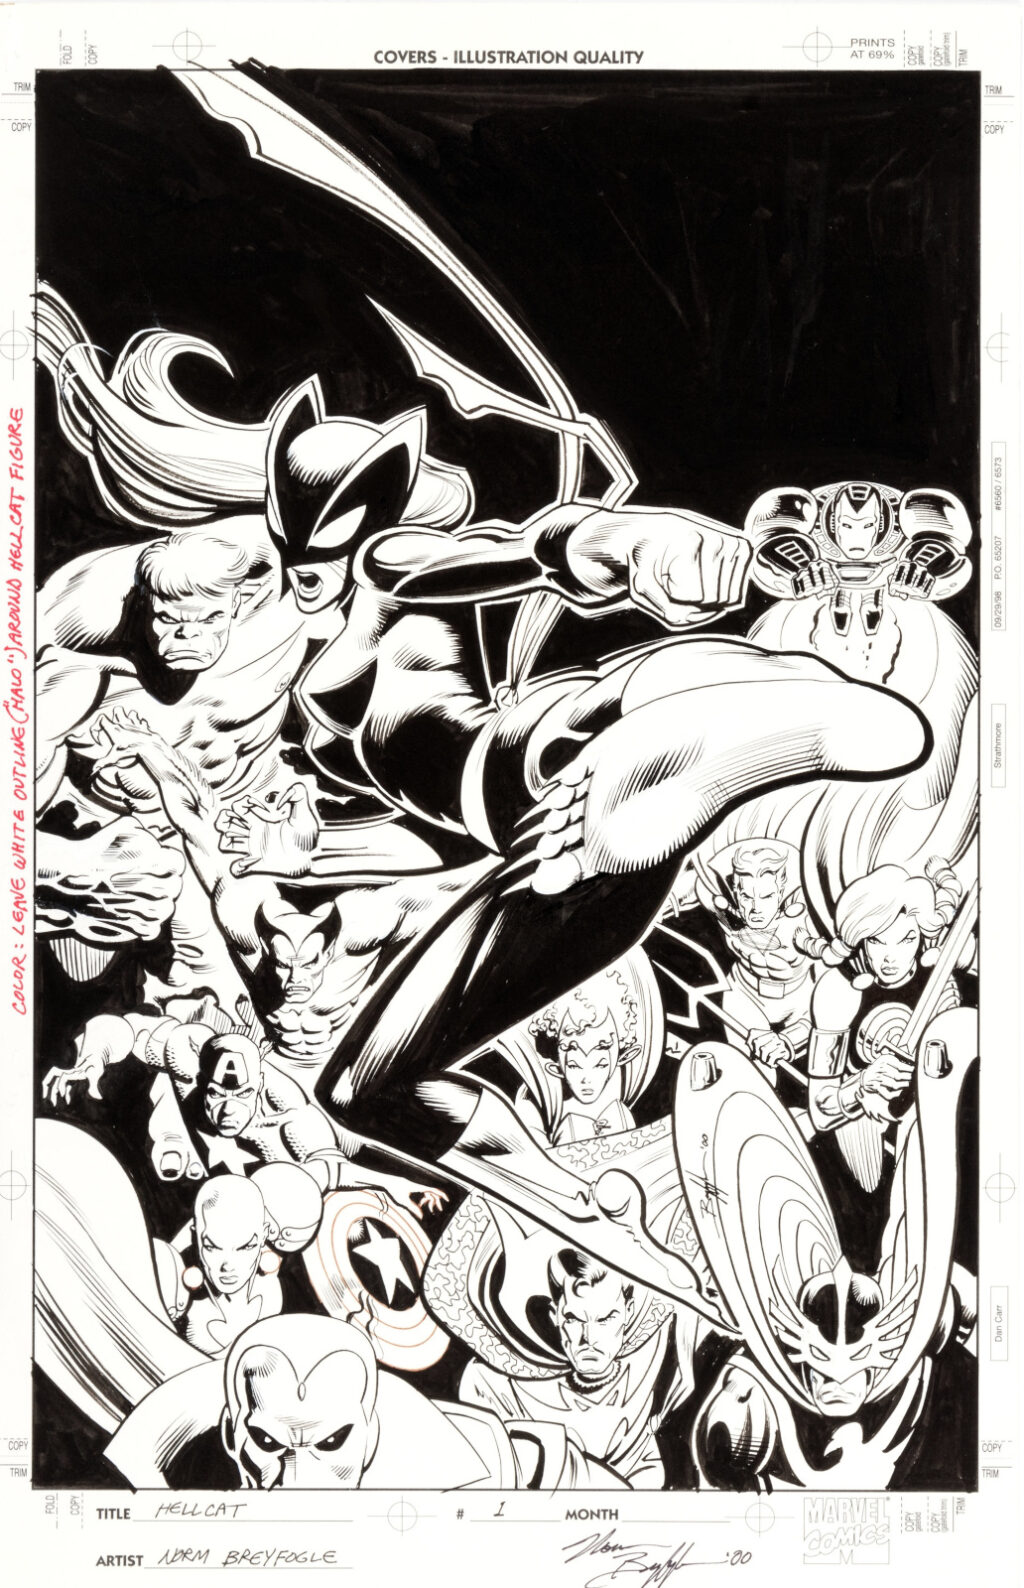 Hellcat issue 1 cover by Norm Breyfogle